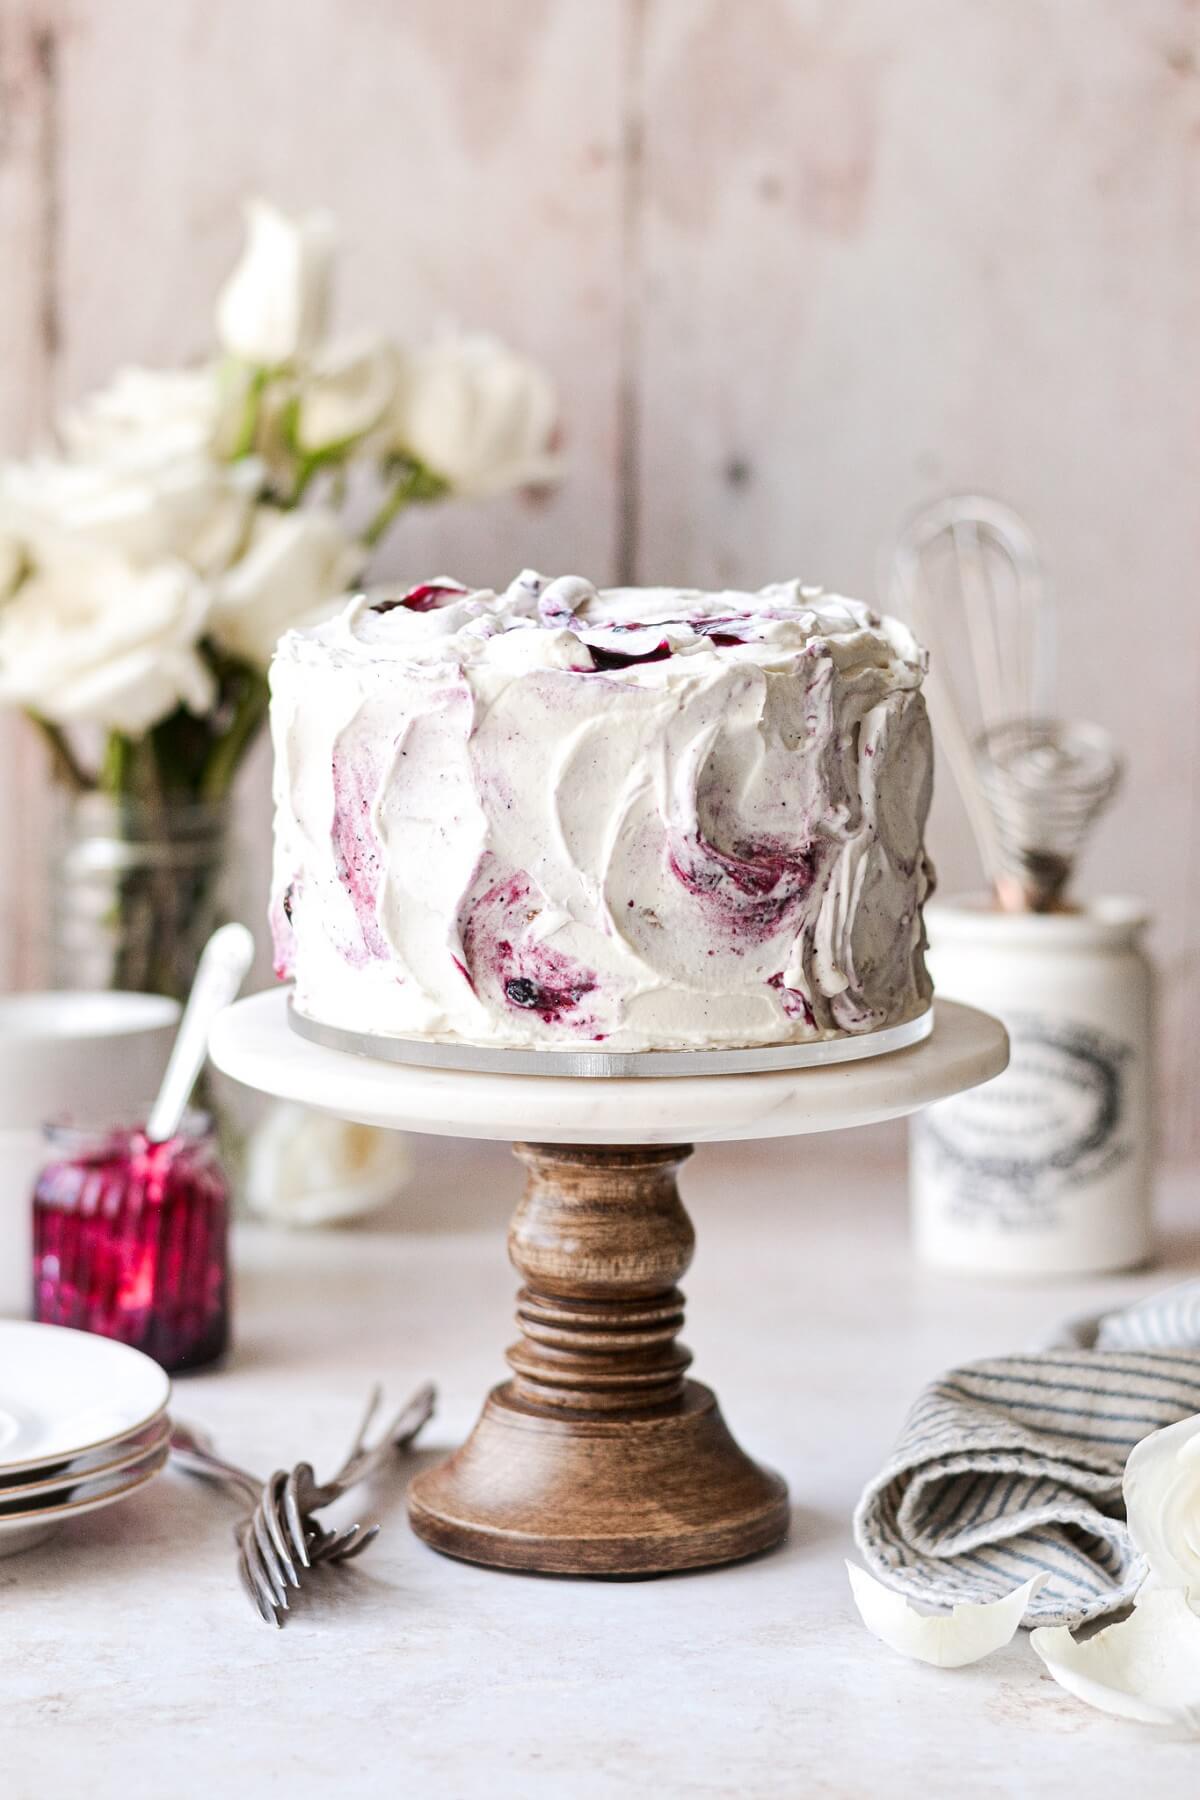 Blueberry jam and cream chantilly cake on a marble and wood cake stand.